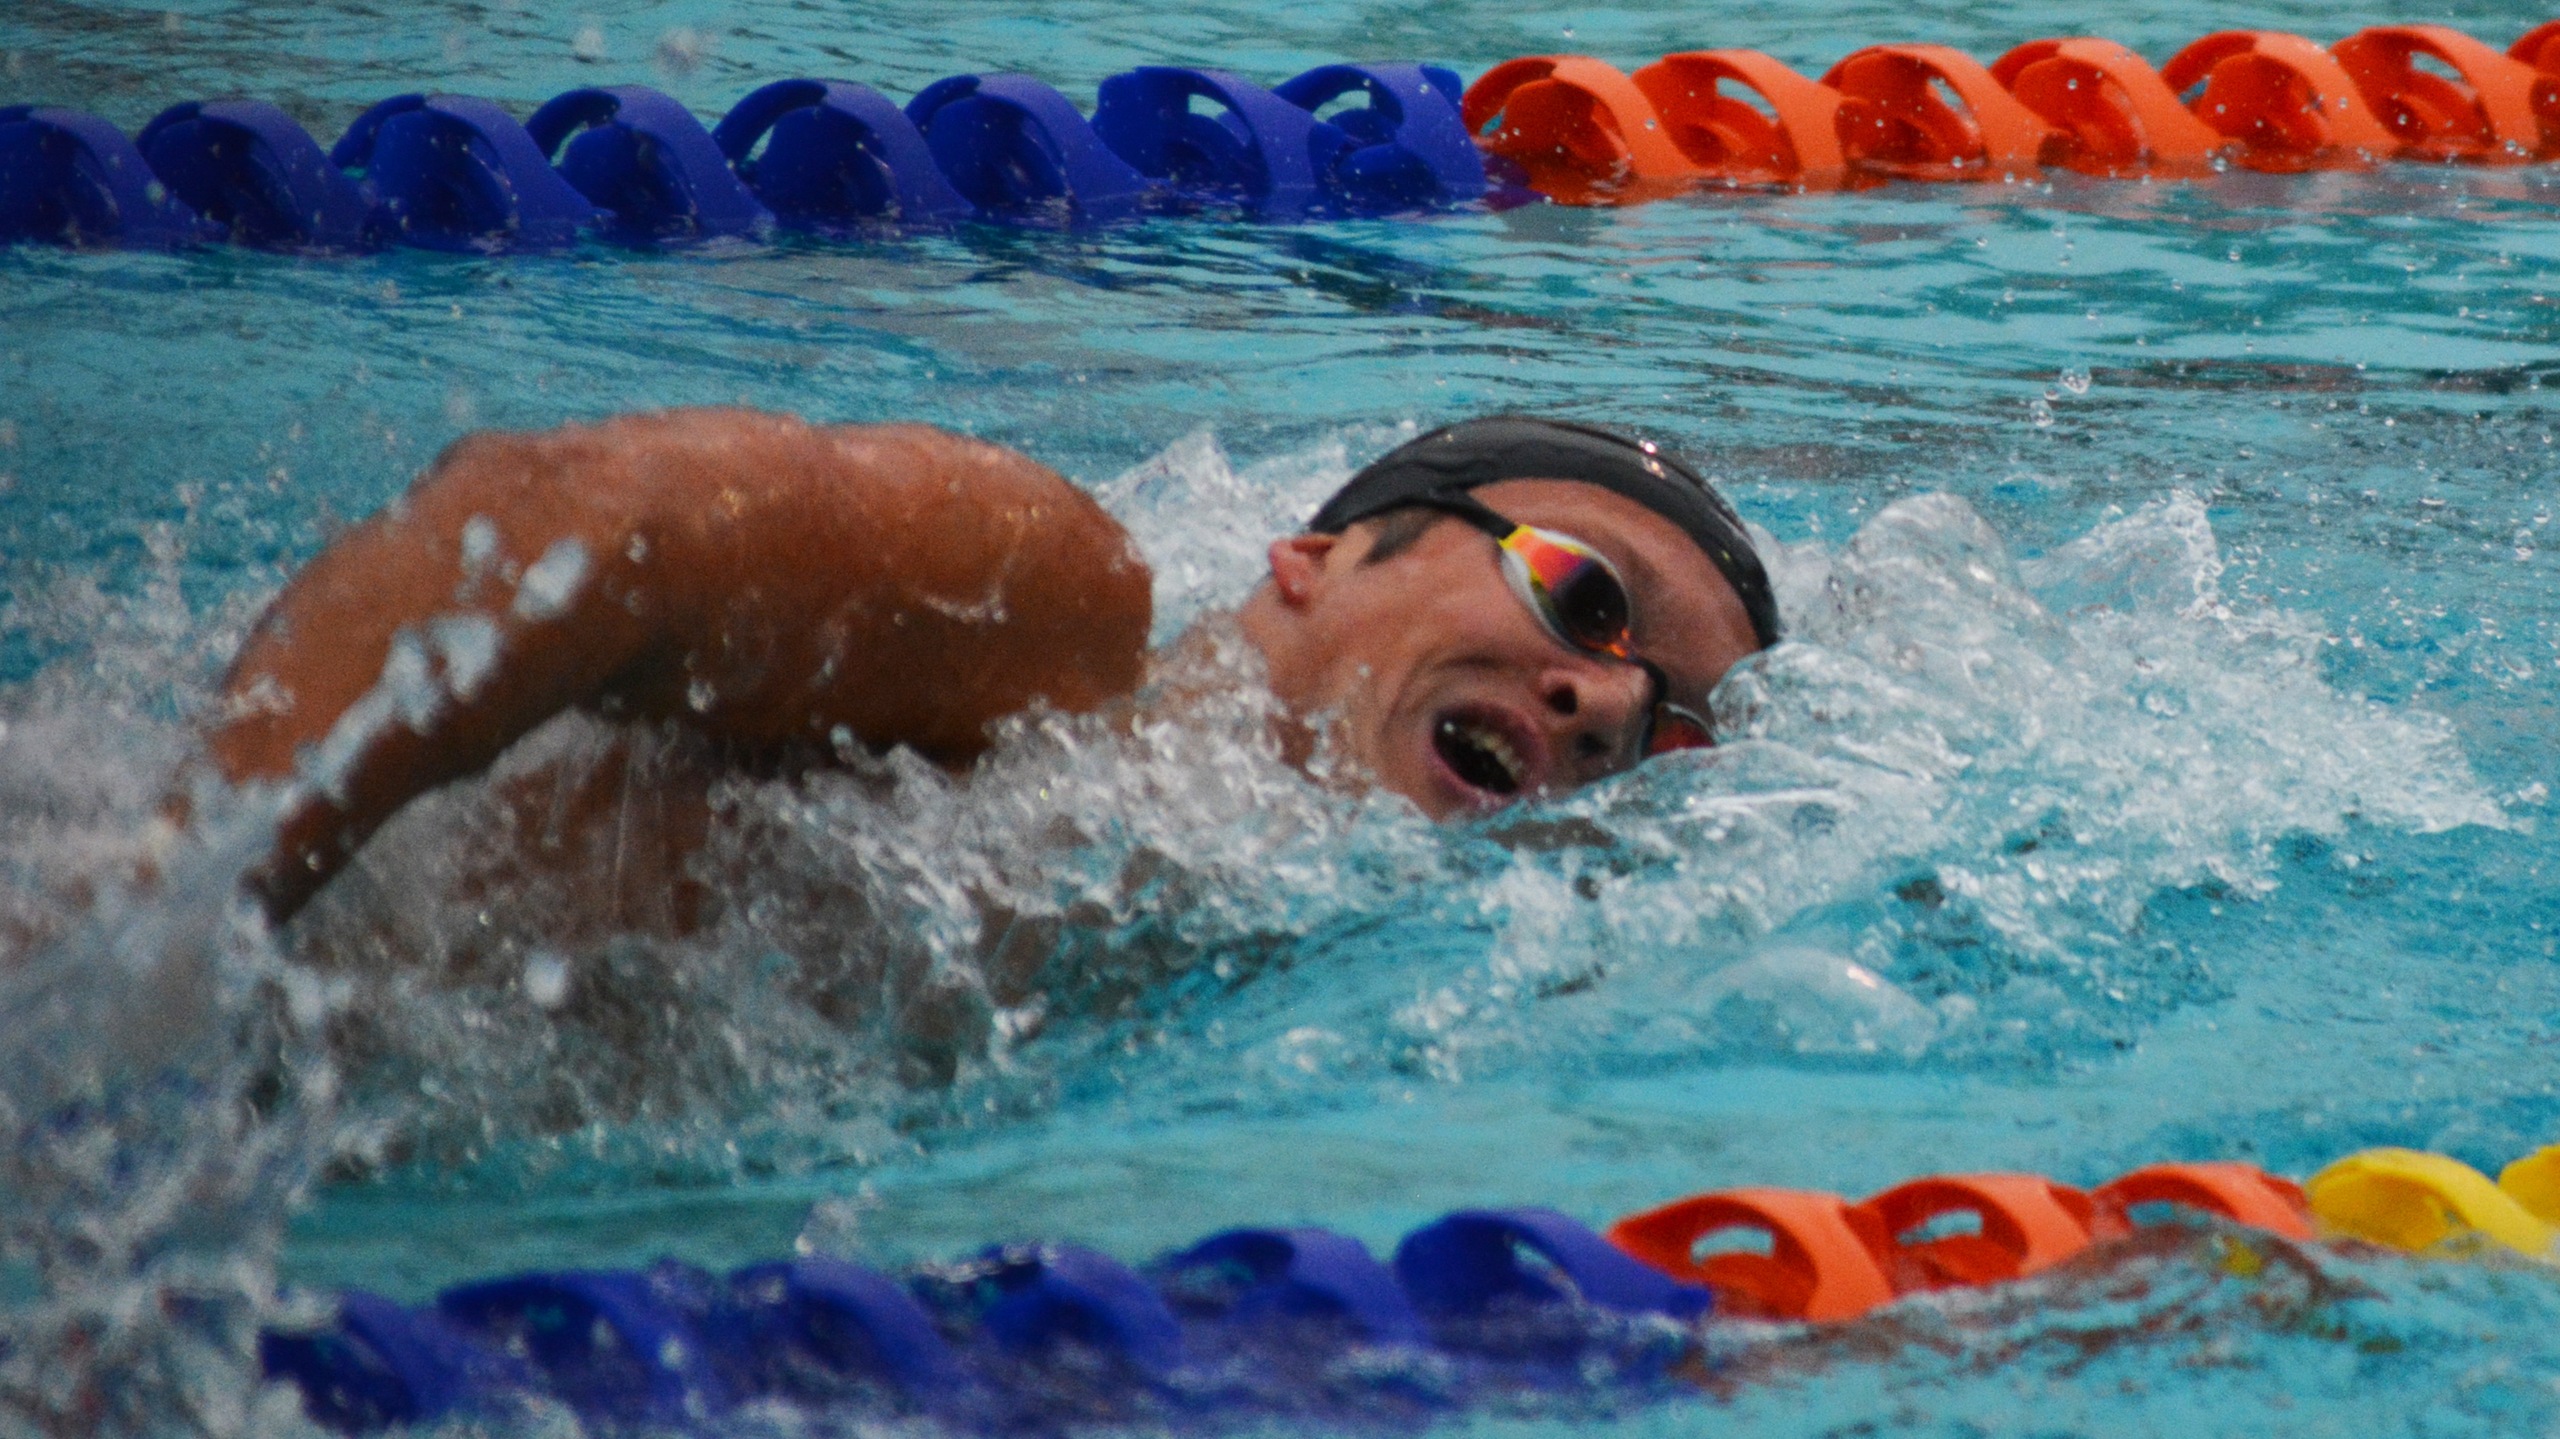 Anderson Breazeale took first in the 500 free (photo by Stella Cheng)